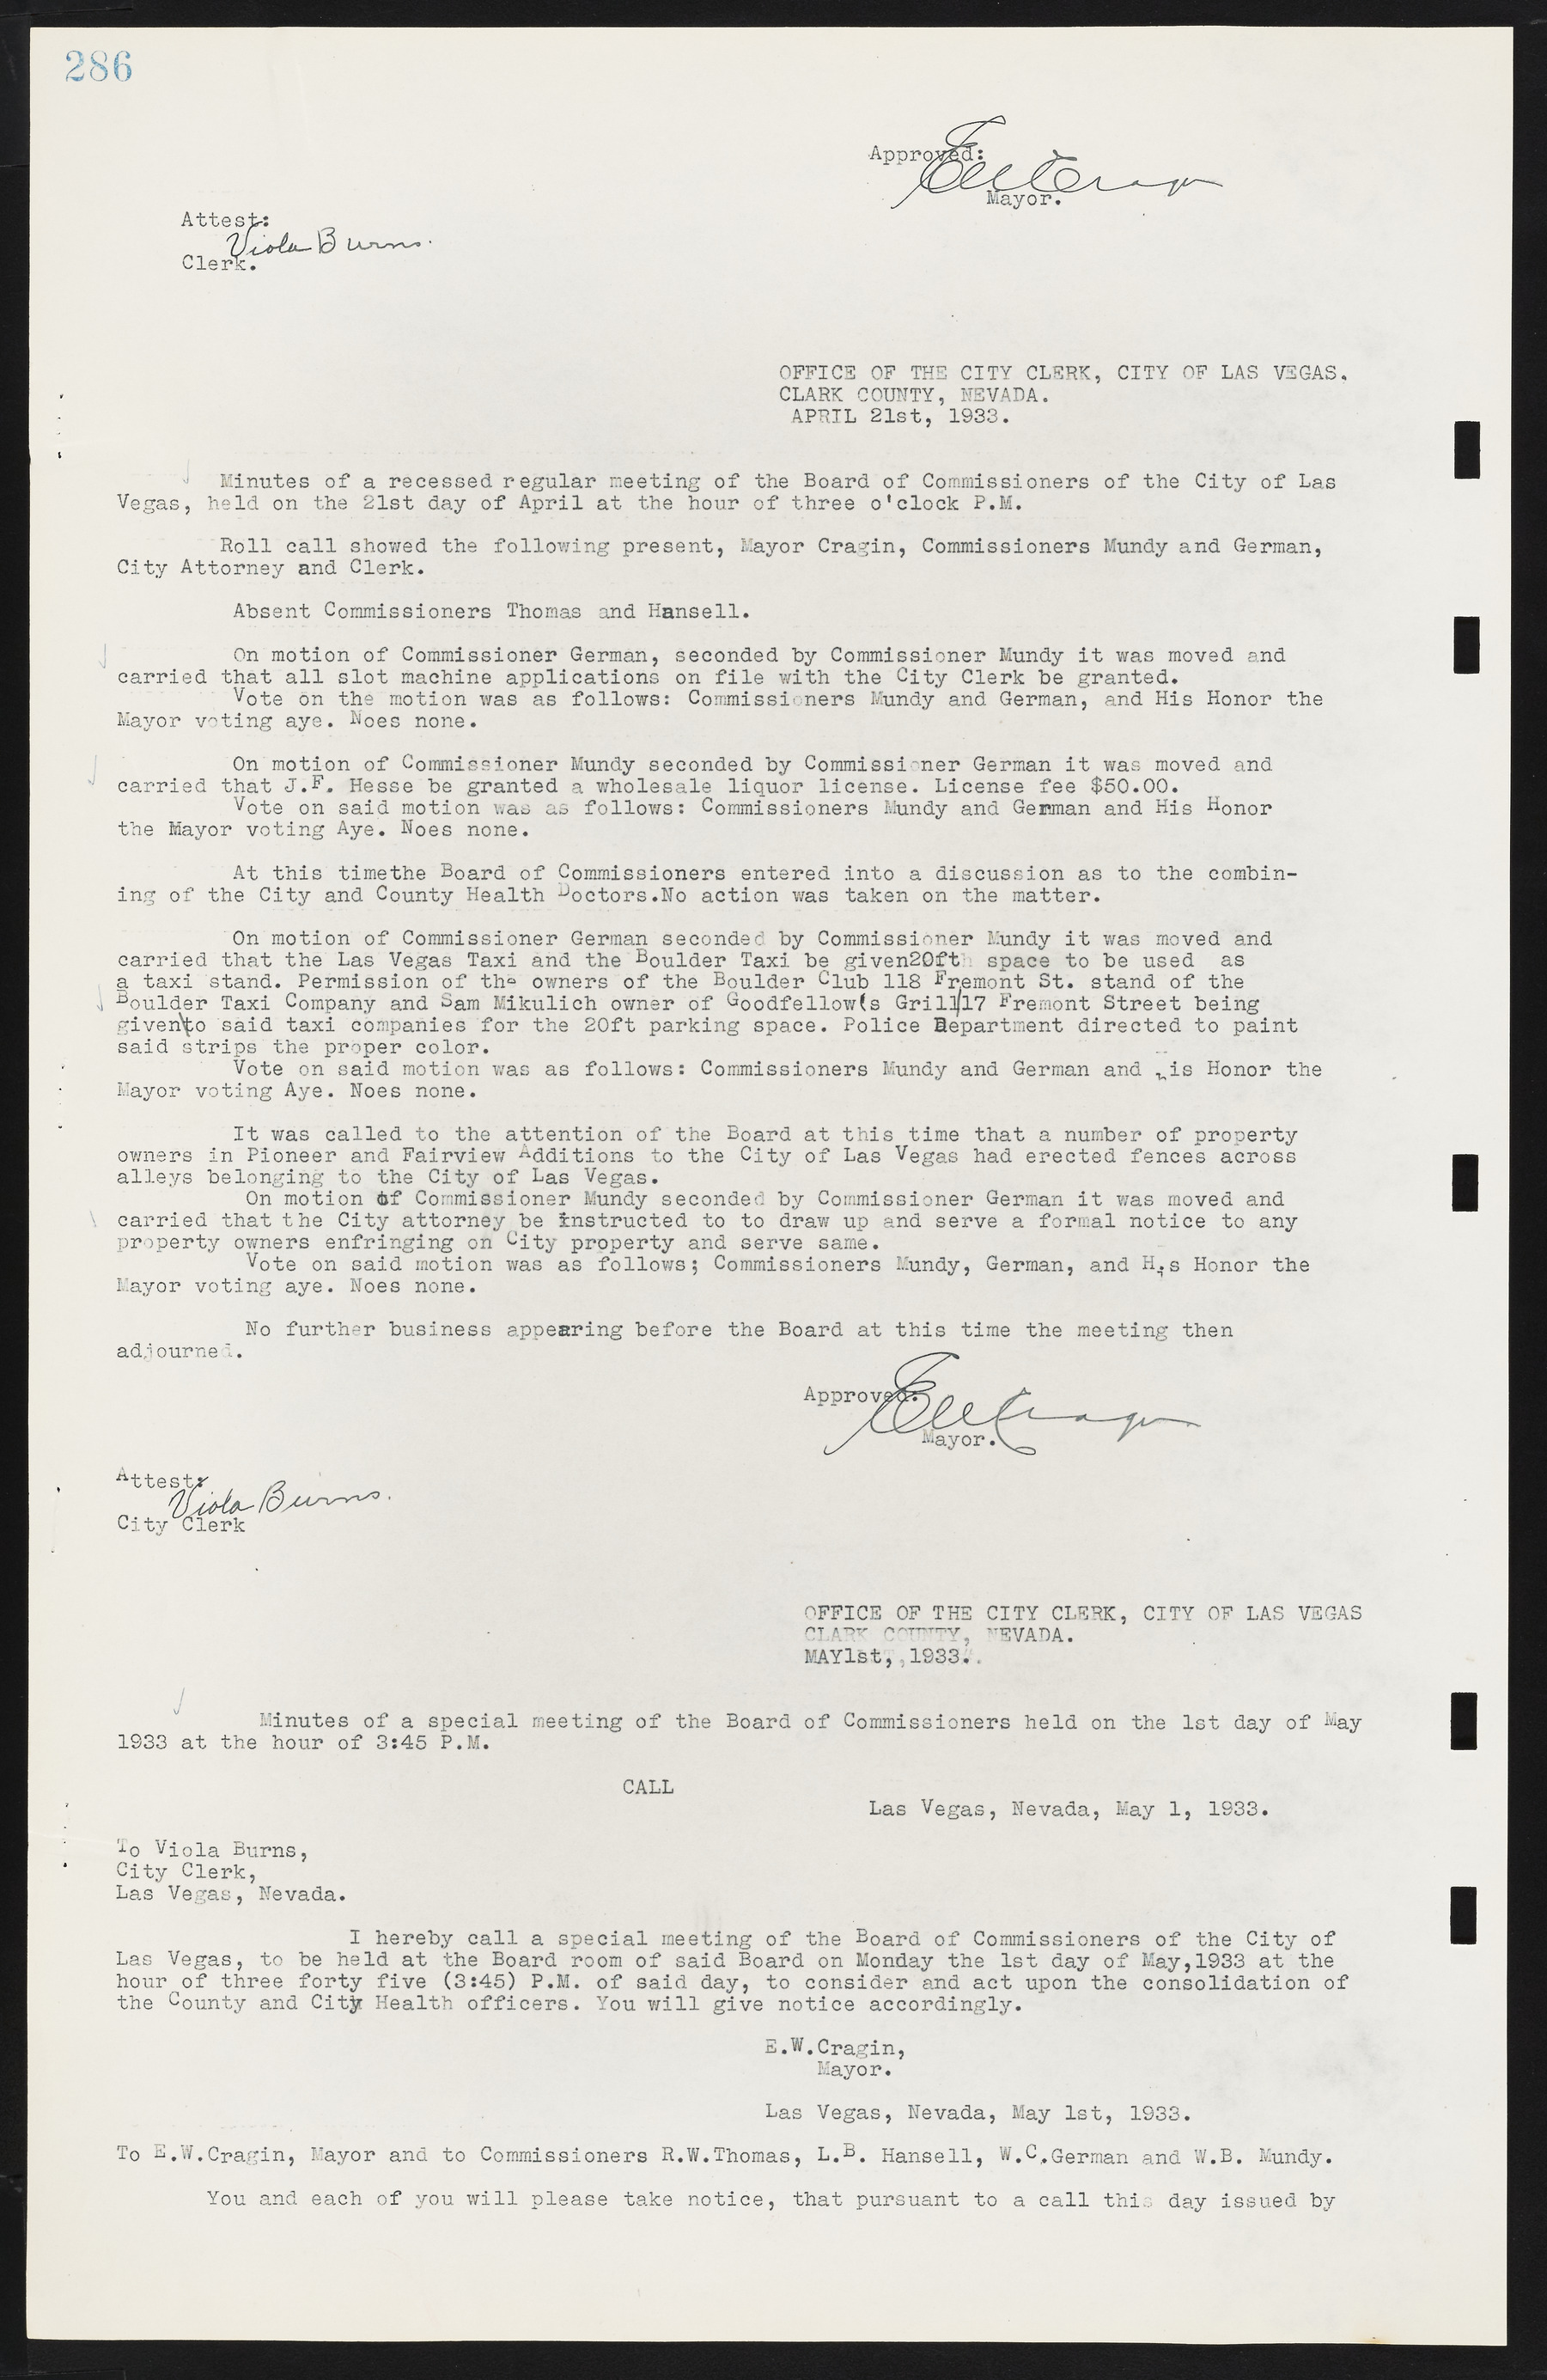 Las Vegas City Commission Minutes, May 14, 1929 to February 11, 1937, lvc000003-293